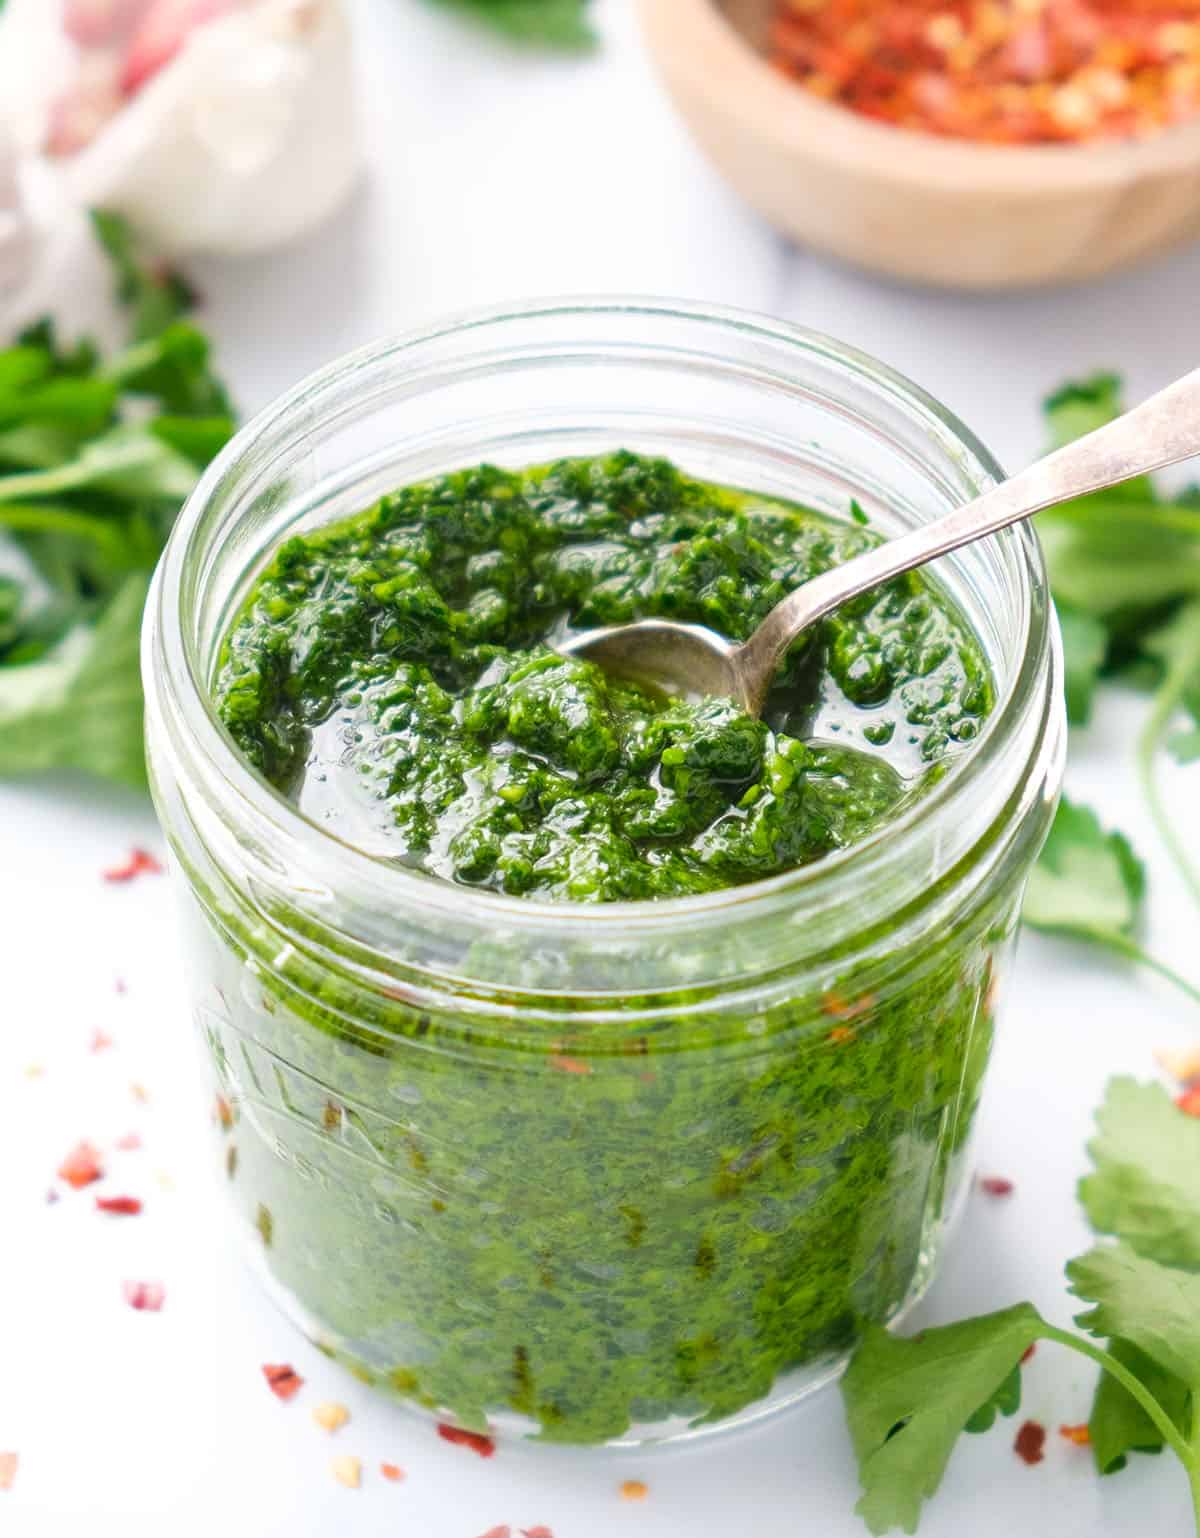 Close-up of a glass jar full of parsley pesto, parsley leaves and some chili flakes in the background.